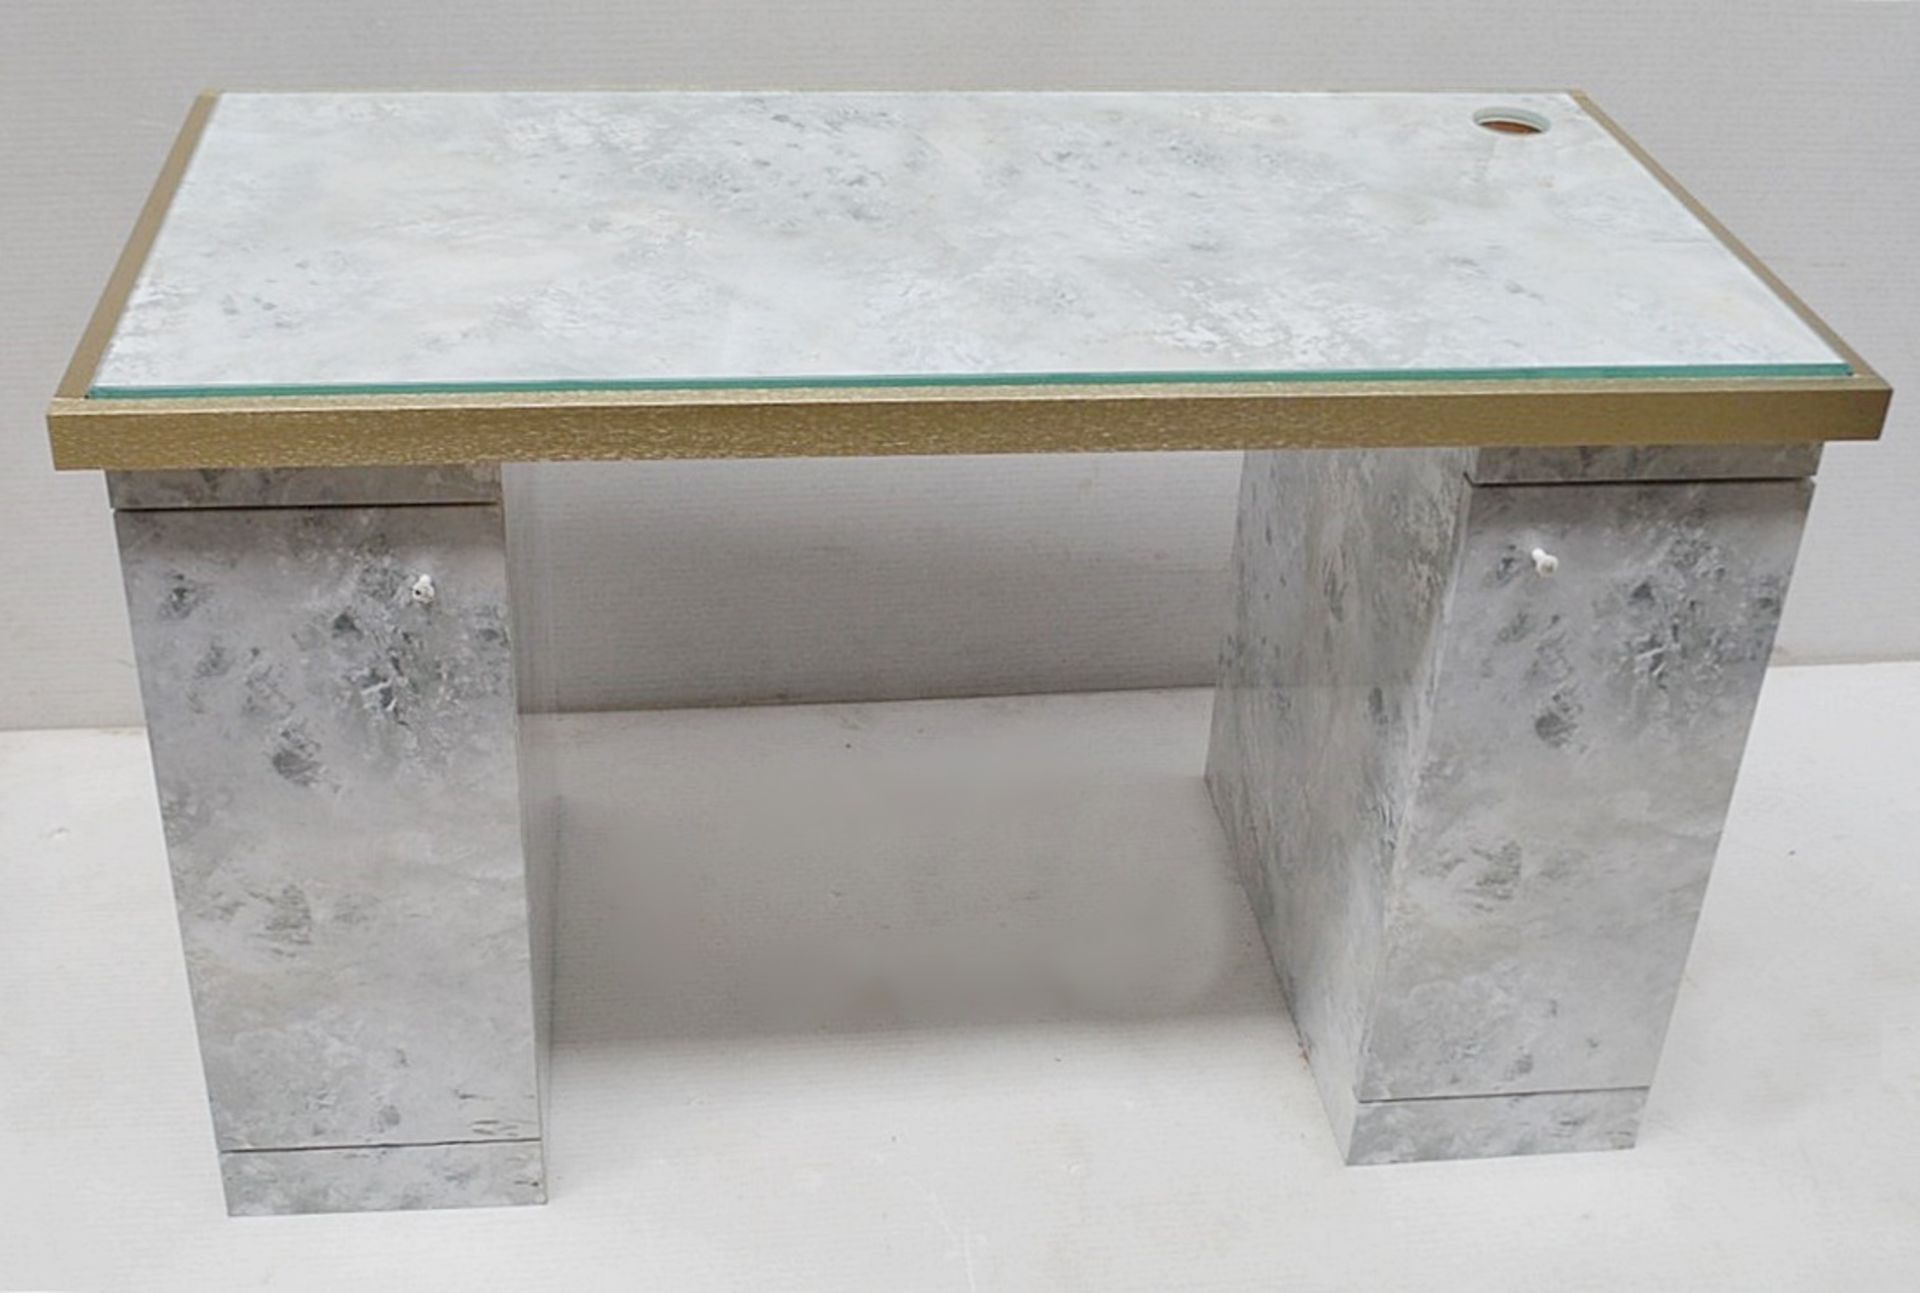 1 x BALDI Designer Retail Display Table / Desk Featuring A Marble Effect Aesthetic